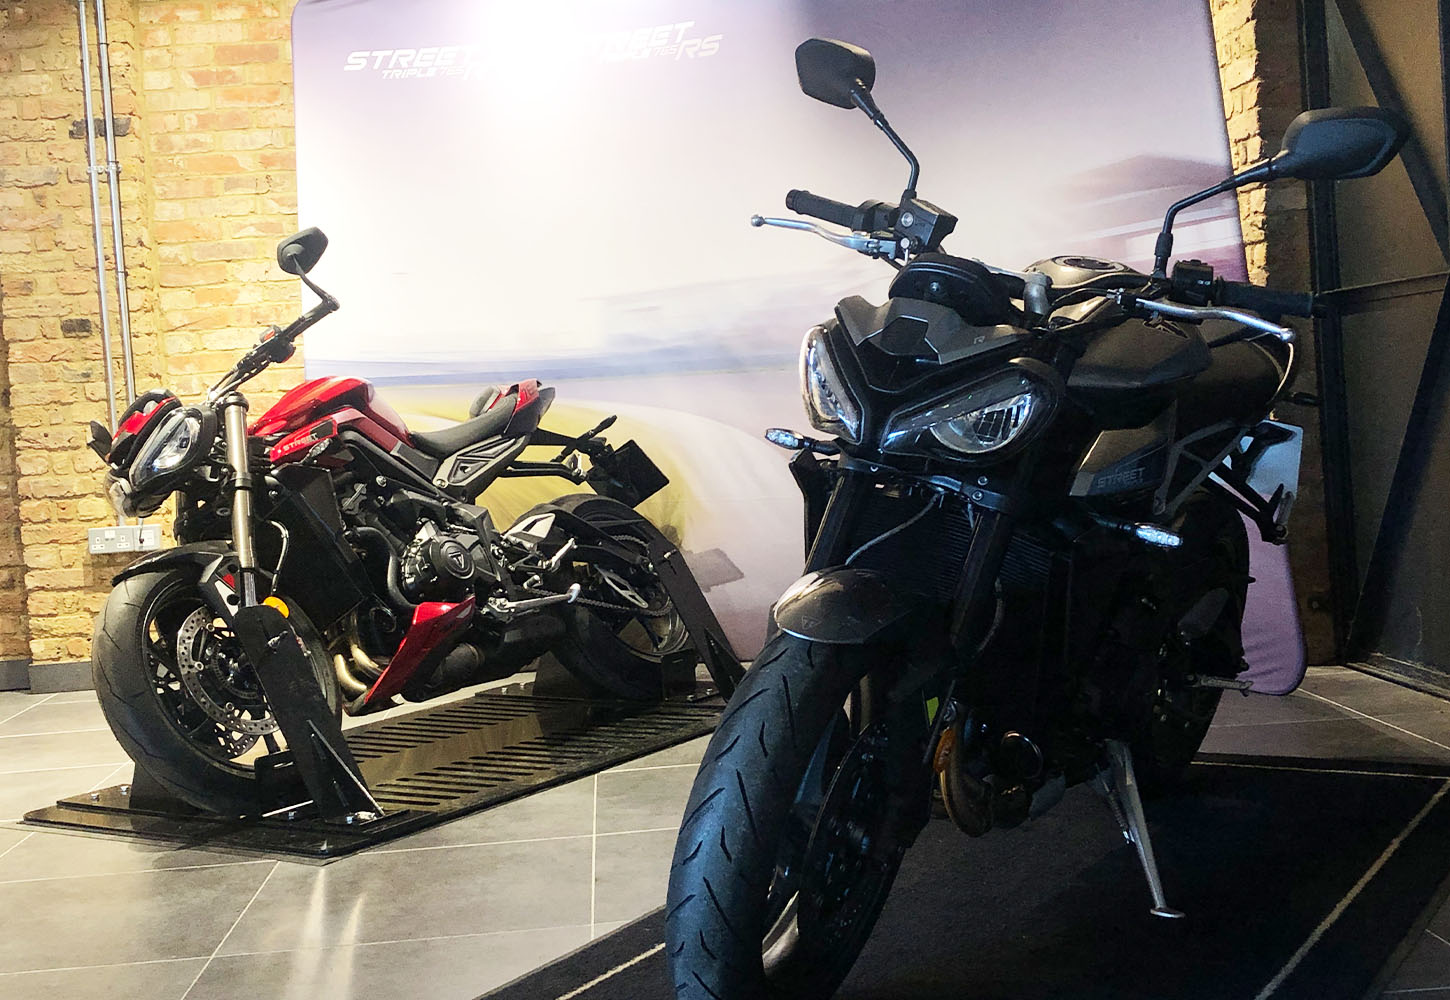 When the Street Triple 765 stopped by at Laguna Triumph in Ashford and Maidstone